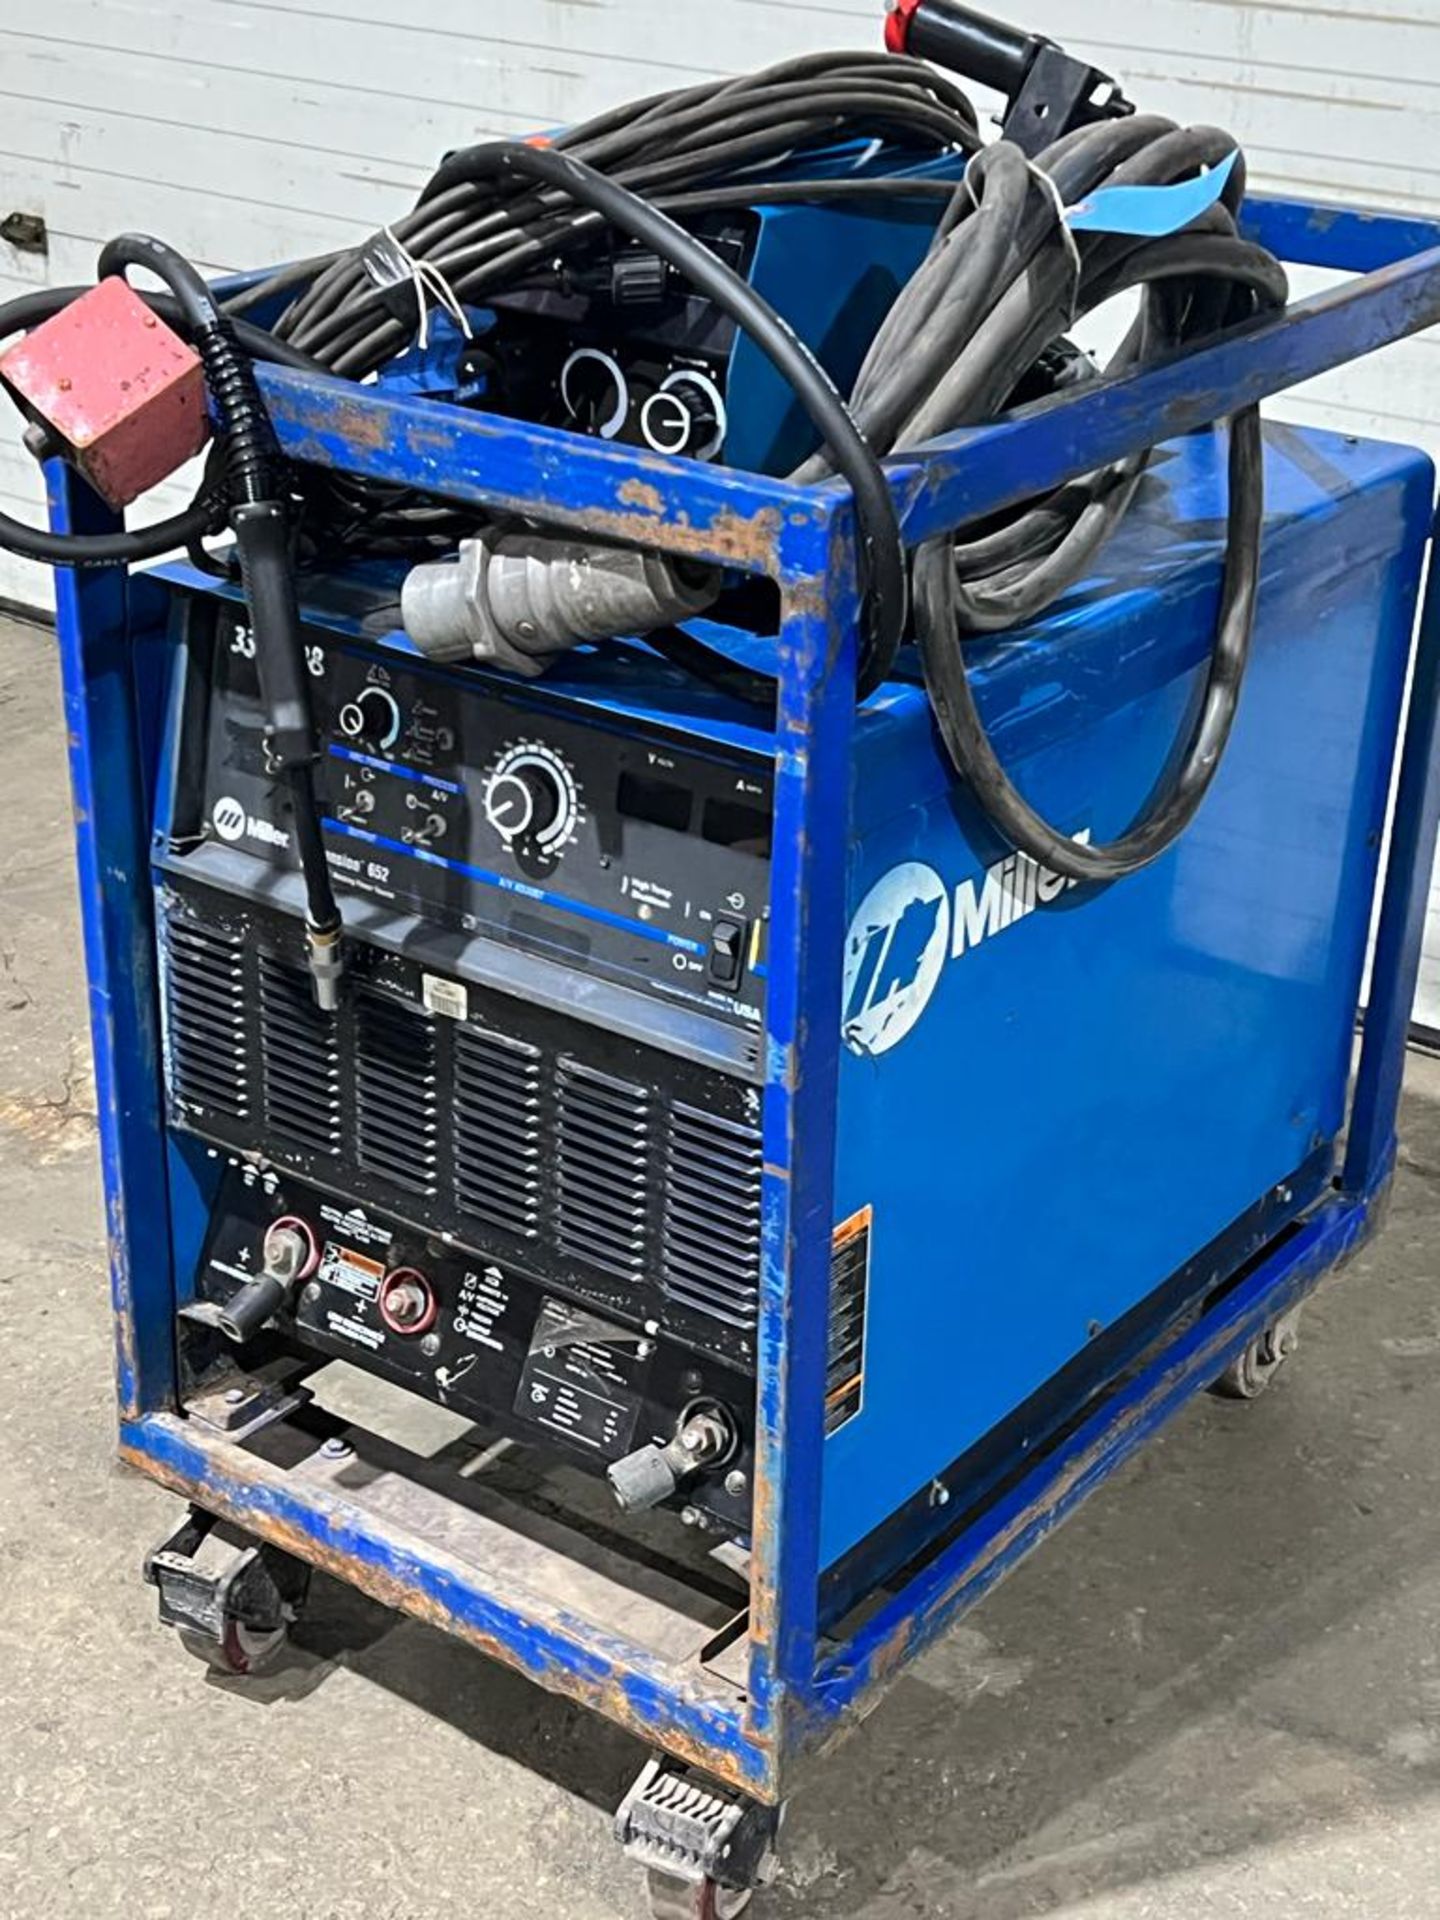 Miller Dimension 652 Mig Welder 650 Amp Mig Tig Stick Multi-Process Power Source with New Wire - Image 2 of 3